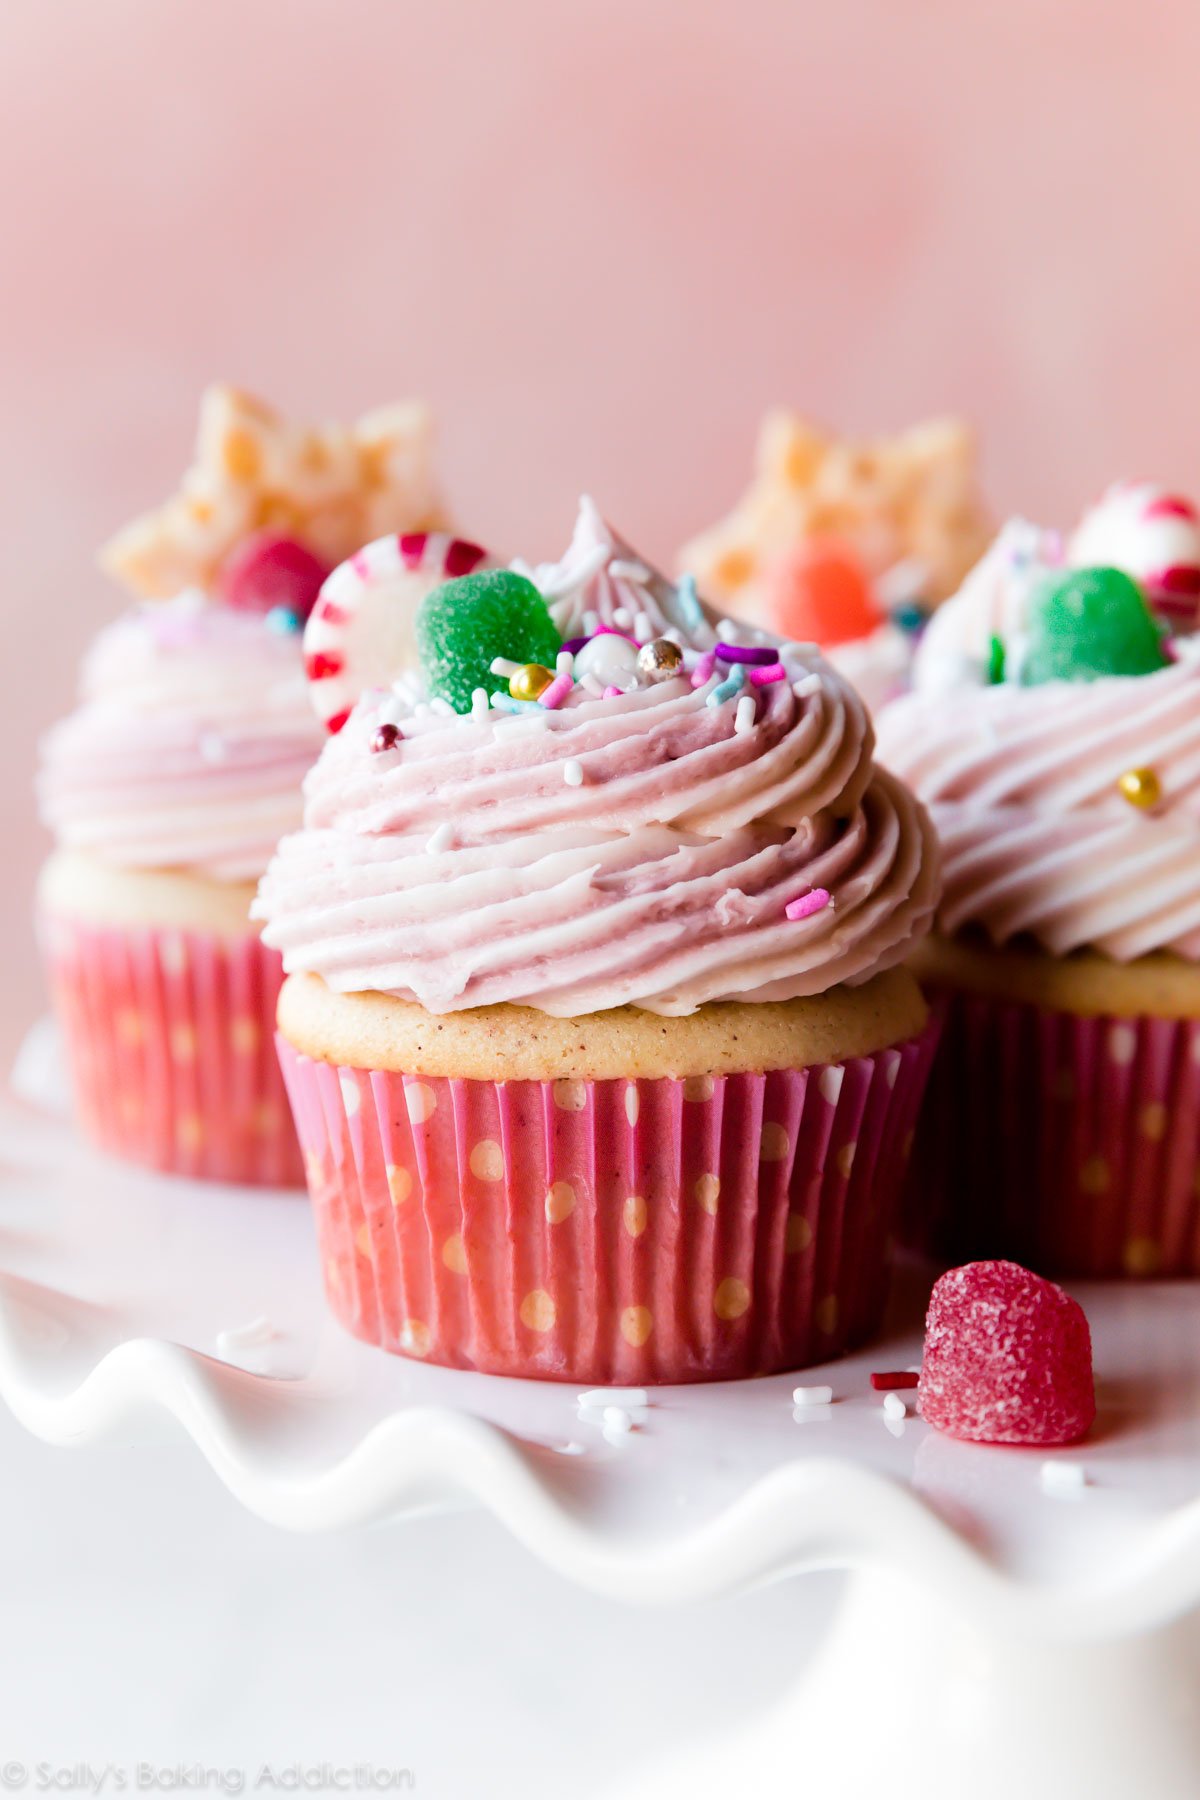 Marbles Iced Fairy Cupcakes Recipe